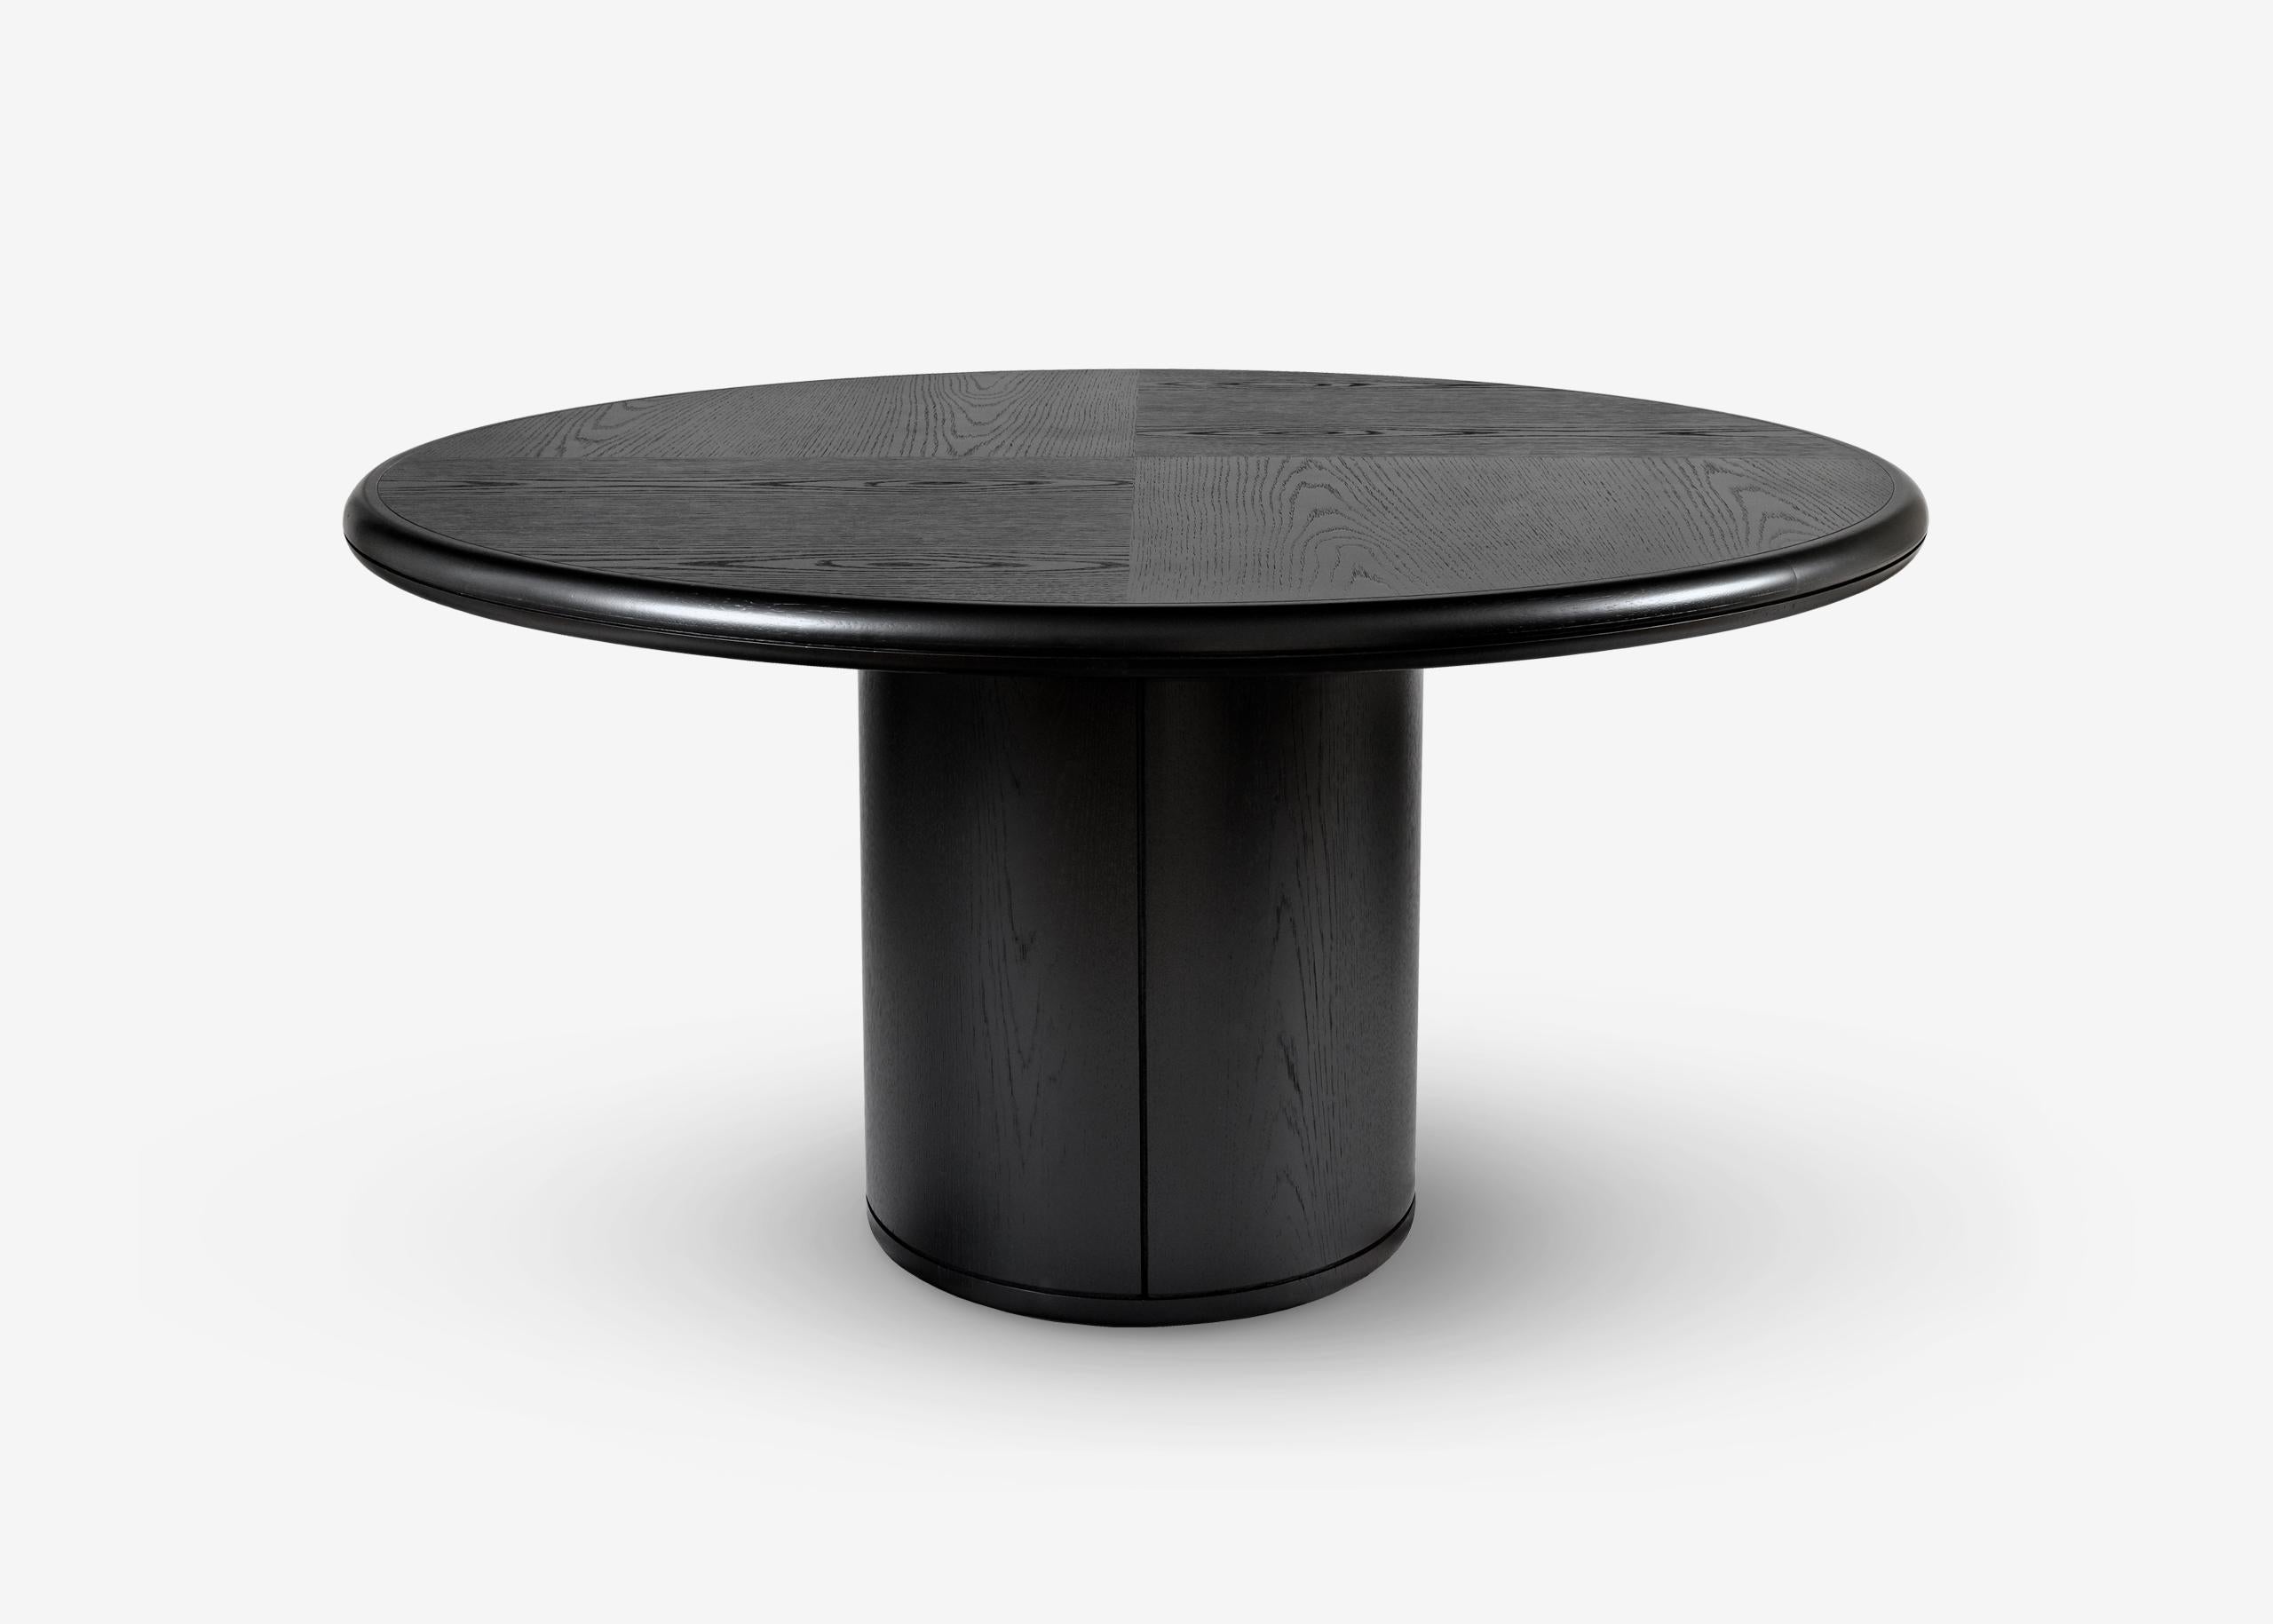 Moon black round table signed by Buket Hos¸can Bazman
Dimensions: Ø 160 x 75 cm
Material: Sandblasted blackened oak dining table

Available in custom sizing and finishes.

Buket Hoscan Bazman was born in Izmir, Turkey, in 1989. Graduated at